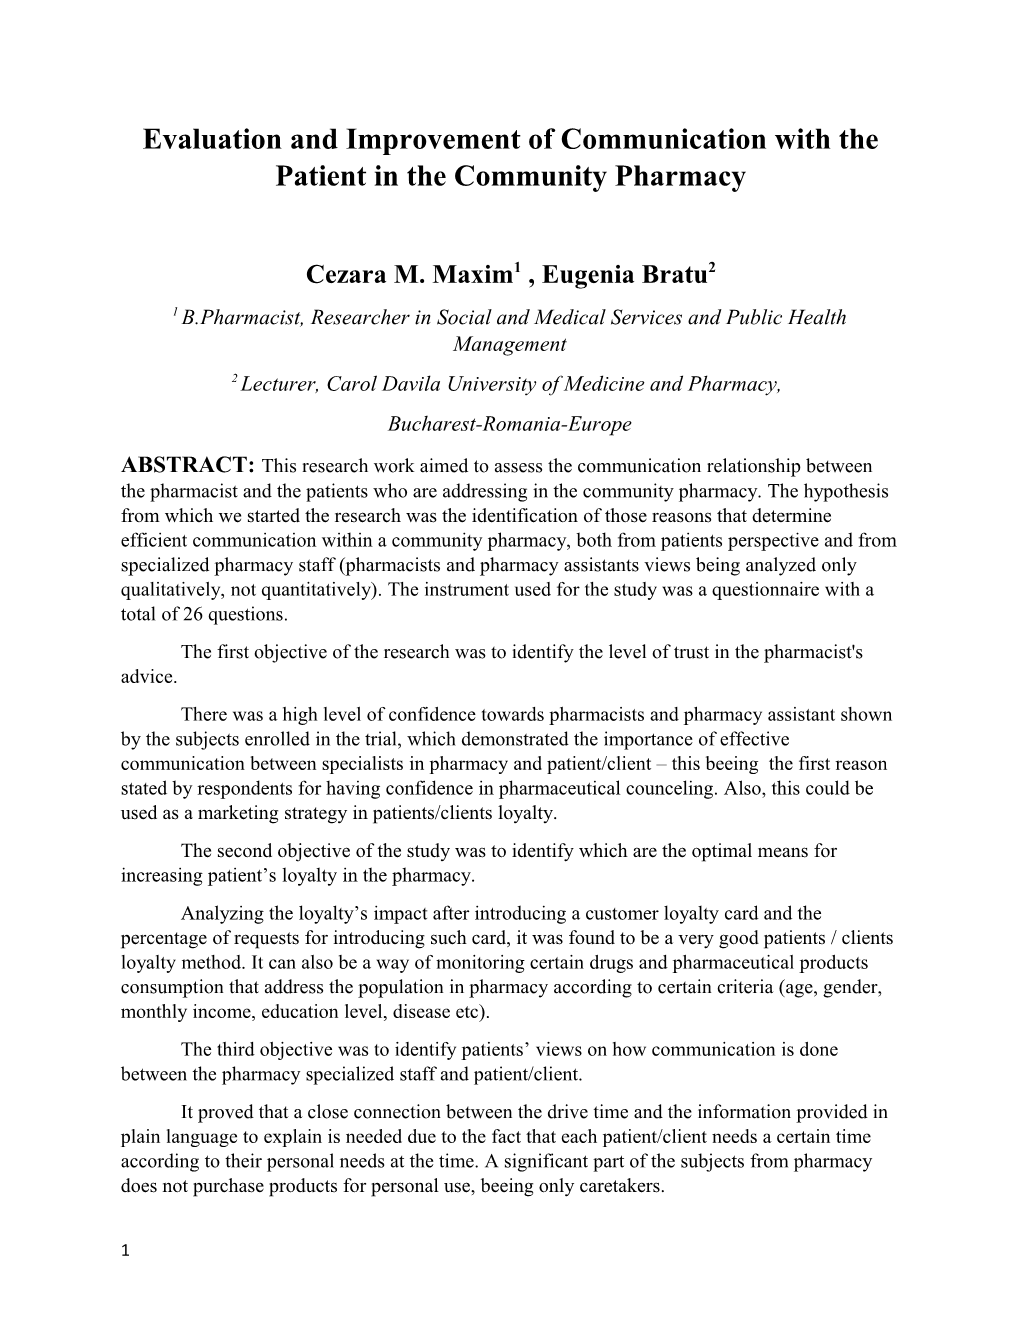 Evaluation and Improvement of Communication with the Patient in the Community Pharmacy